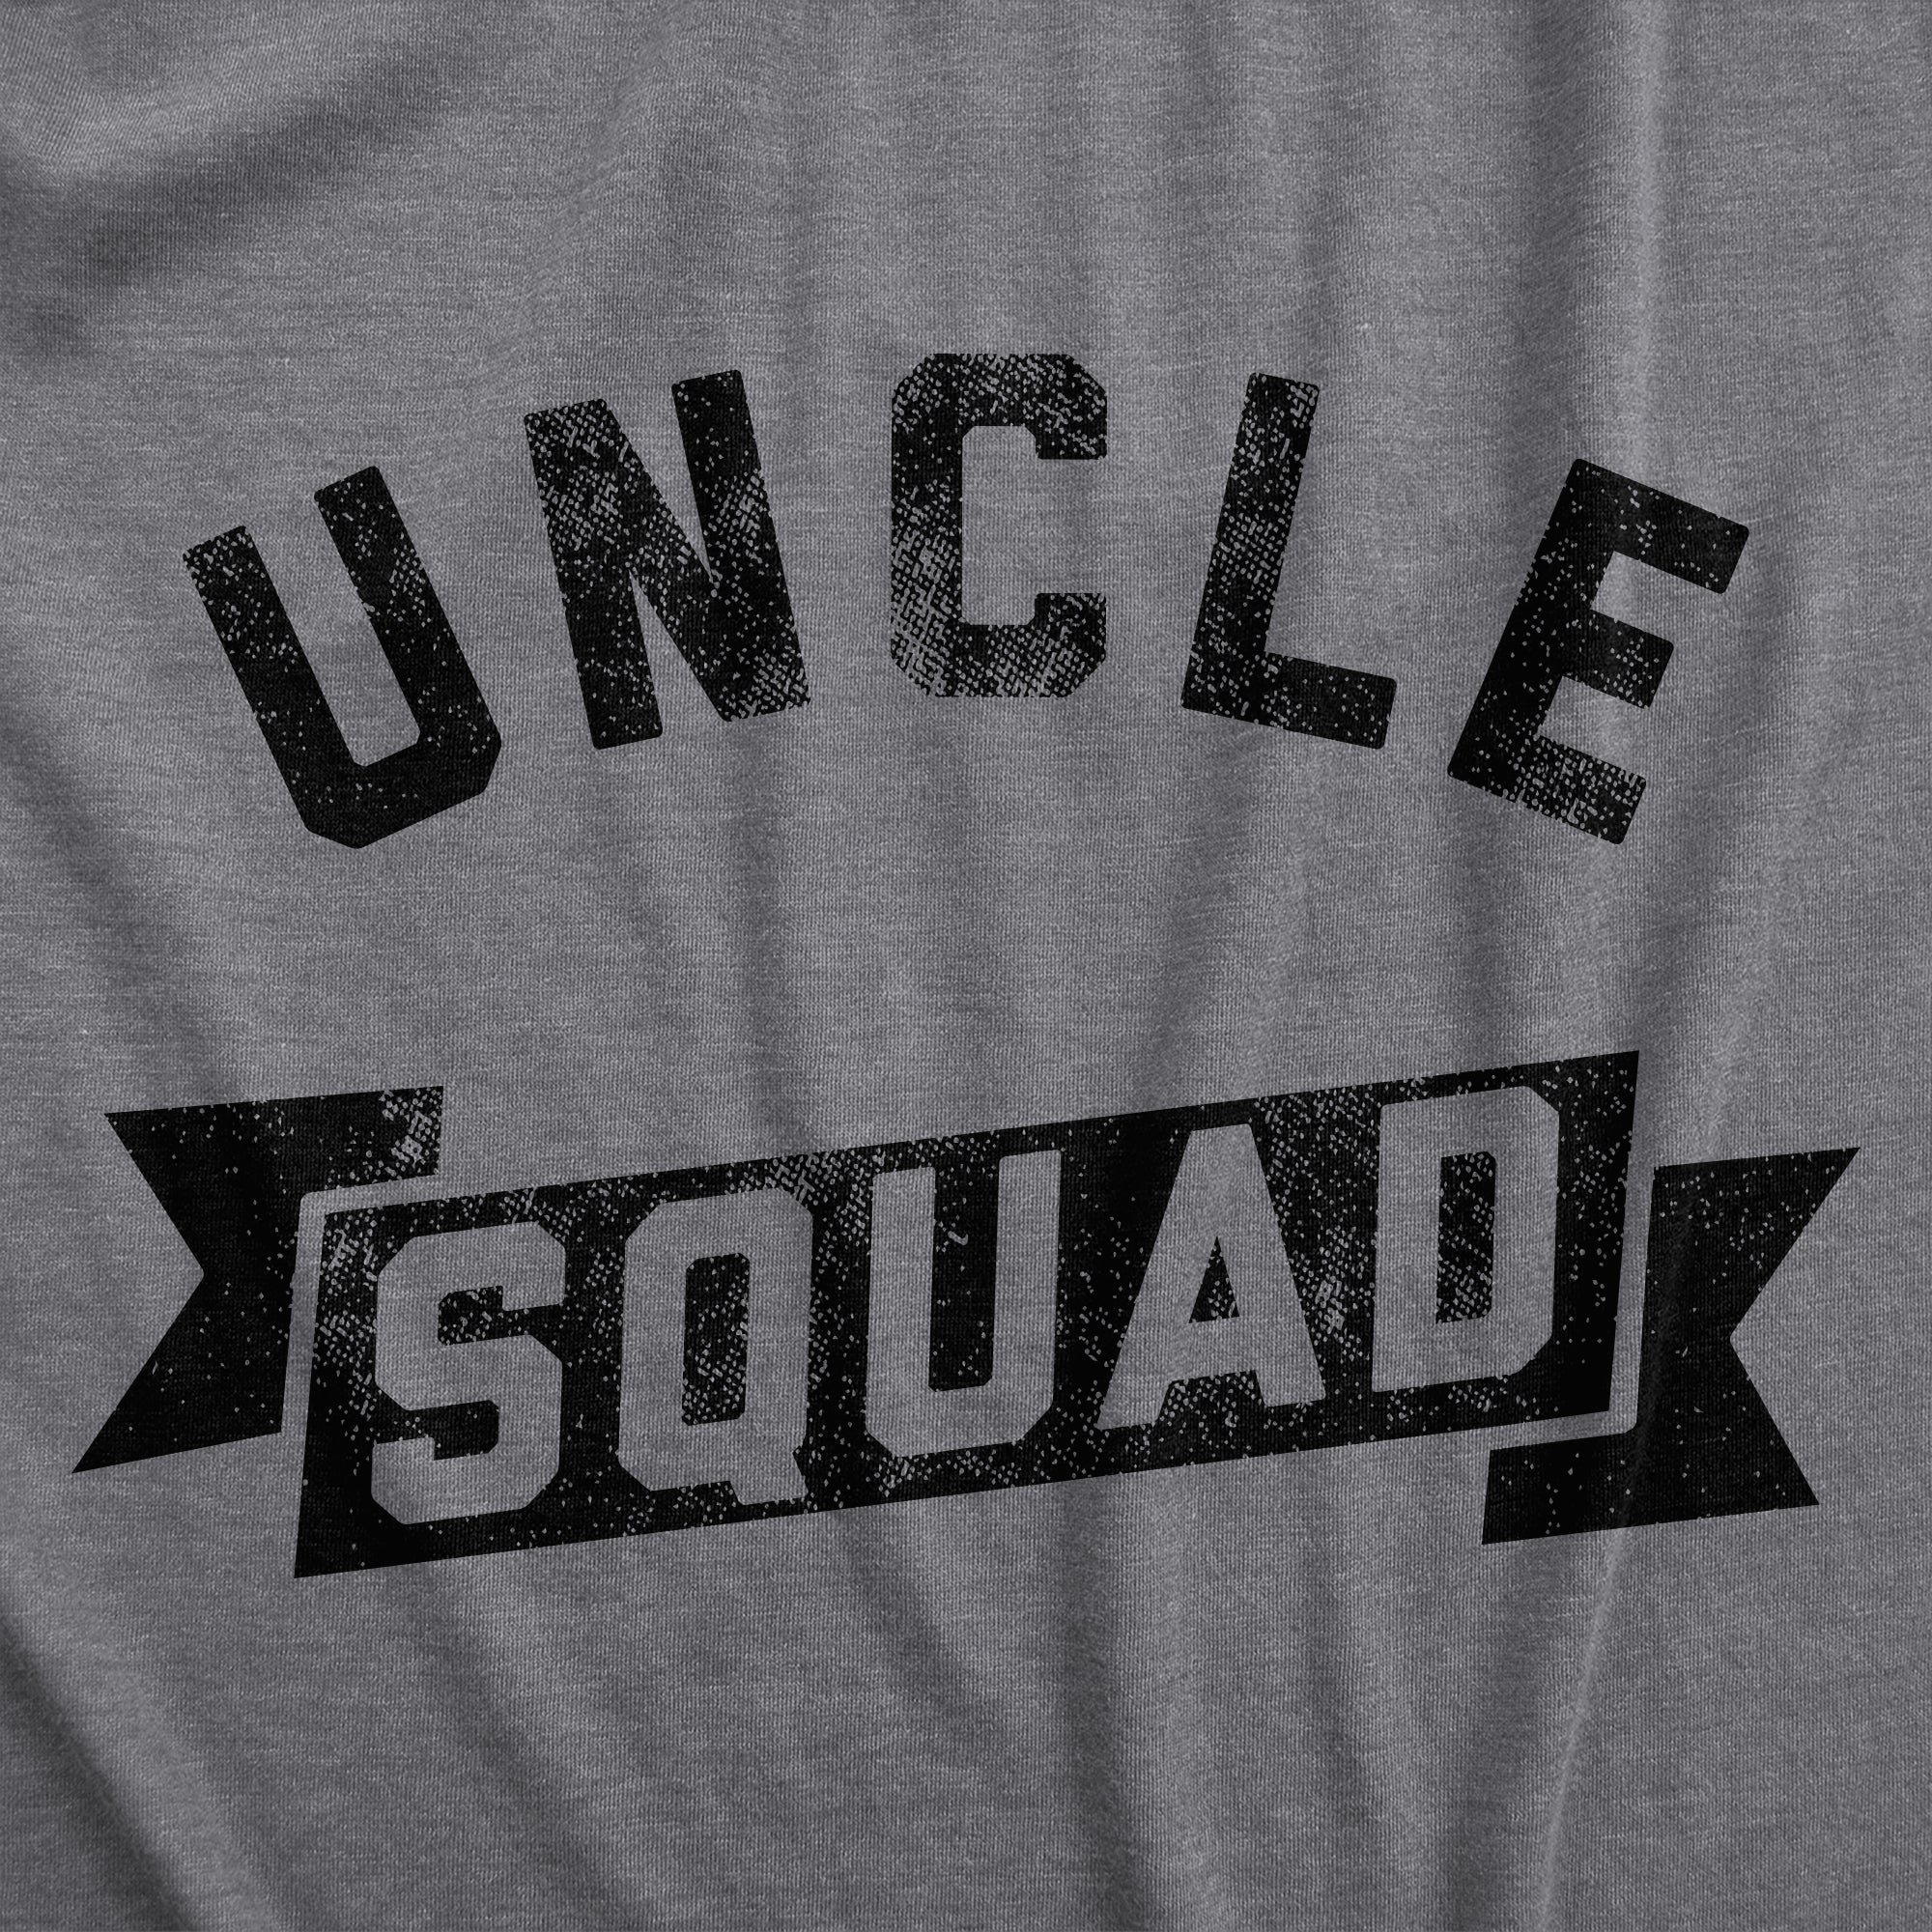 Funny Dark Heather Grey - Uncle Squad Uncle Squad Mens T Shirt Nerdy Uncle Tee